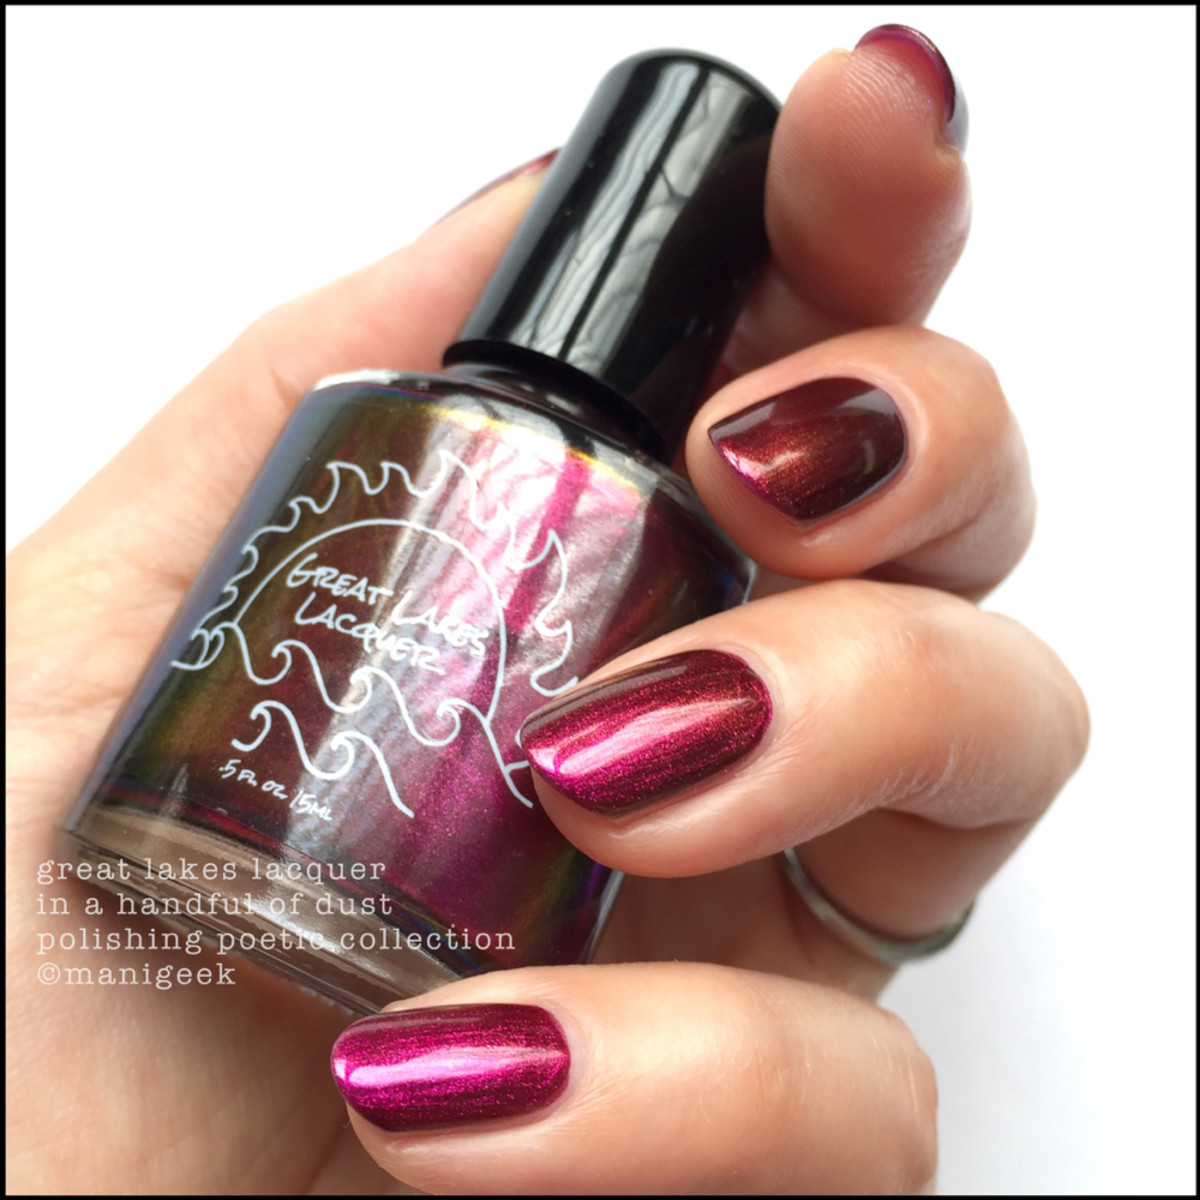 Great Lakes Lacquer In a Handful of Dust_Indie Expo Canada Swatches Manigeek